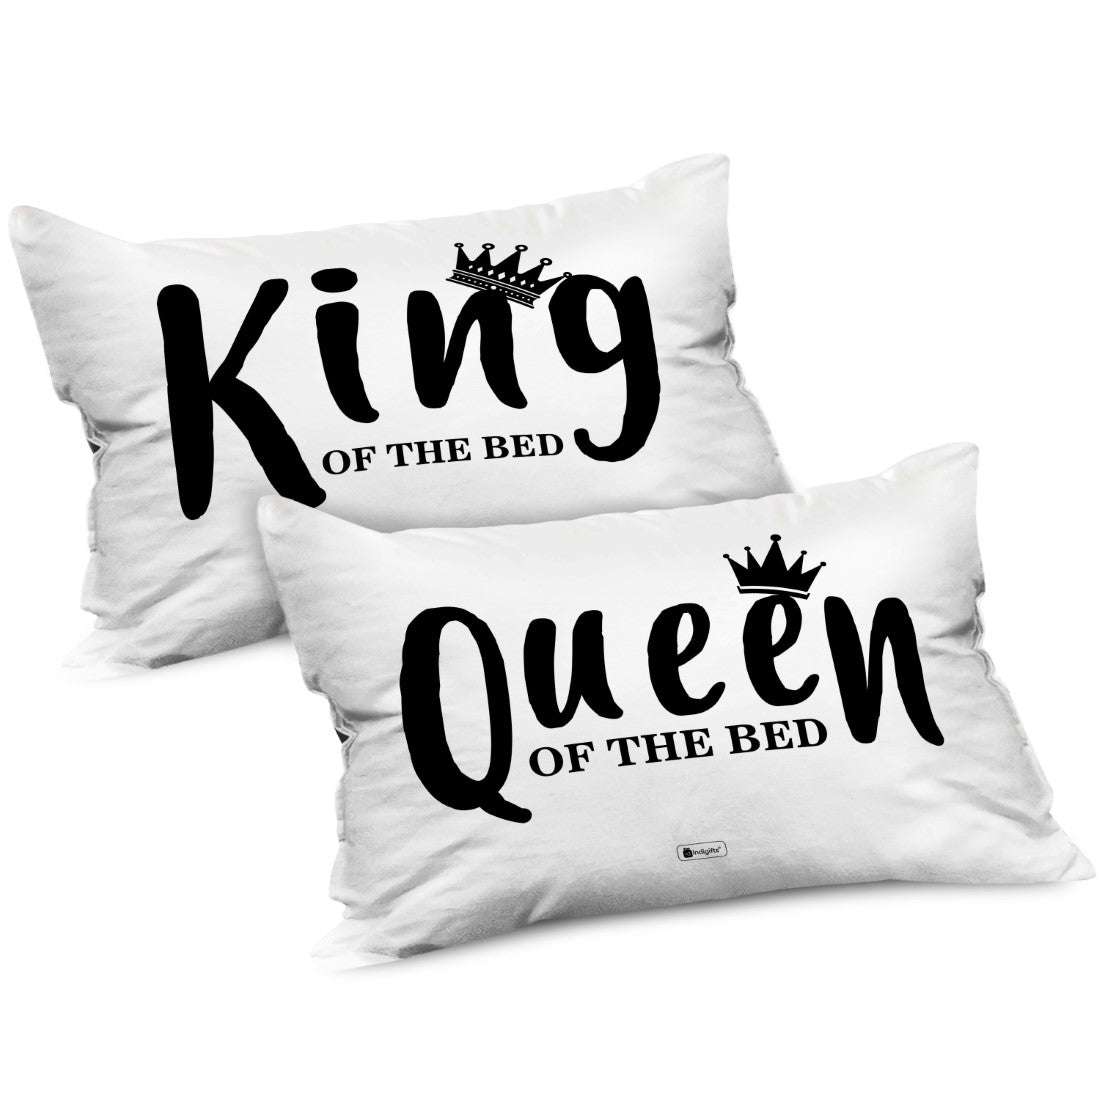 Wedding Gifts Personalized Pillow Gift for Couples Engagement Gift Idea  Throw Pillow Couples Name Established Date Custom Pillow - Etsy